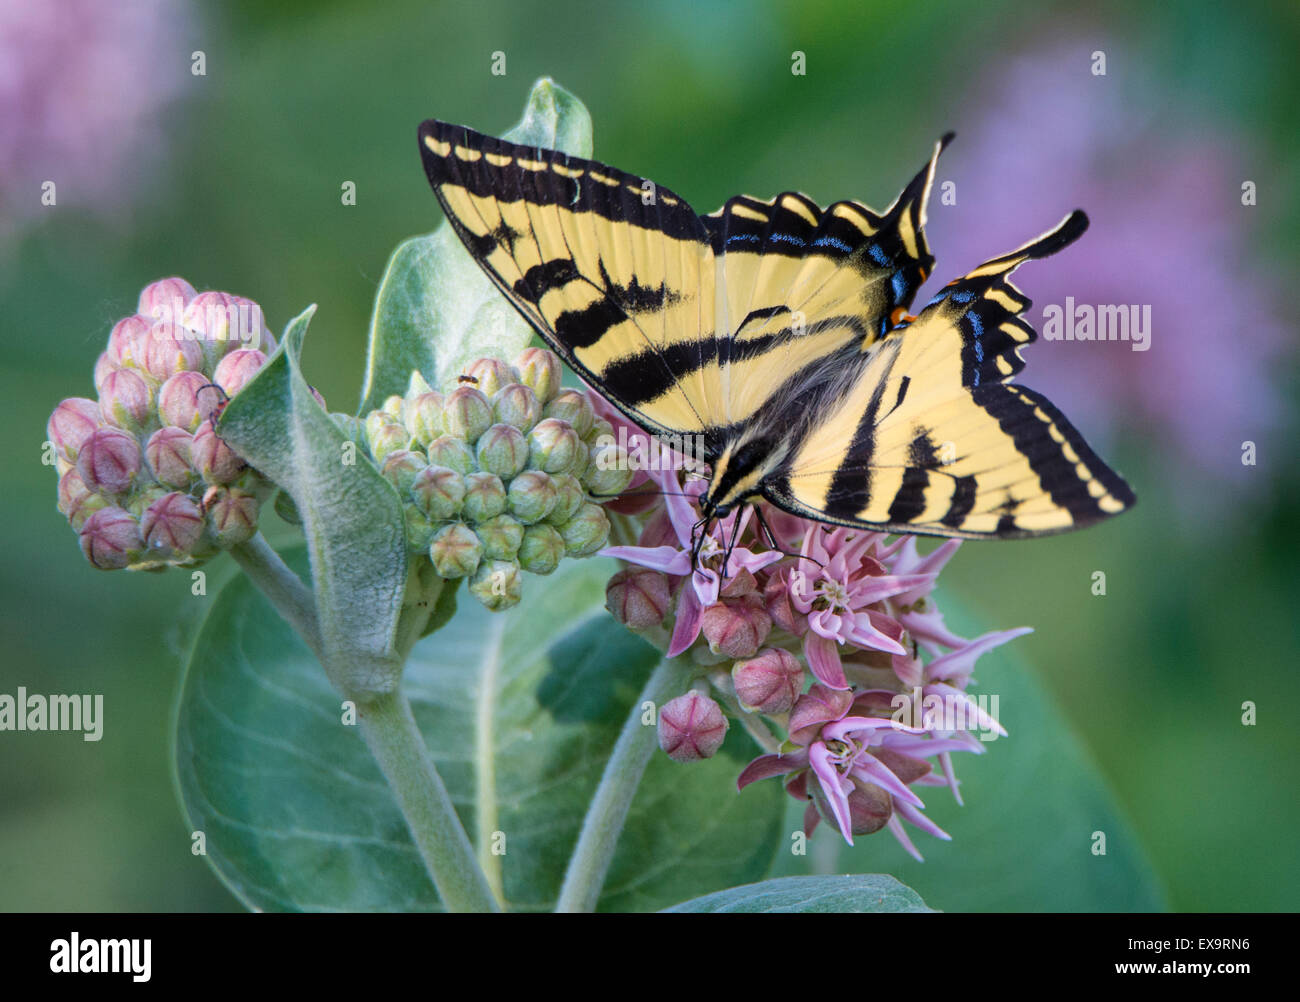 Butterflys,  Tiger Swallowtail Butterfly sipping nector from Bloomimg Common Milkweed plant. Idaho, USA. North American Stock Photo